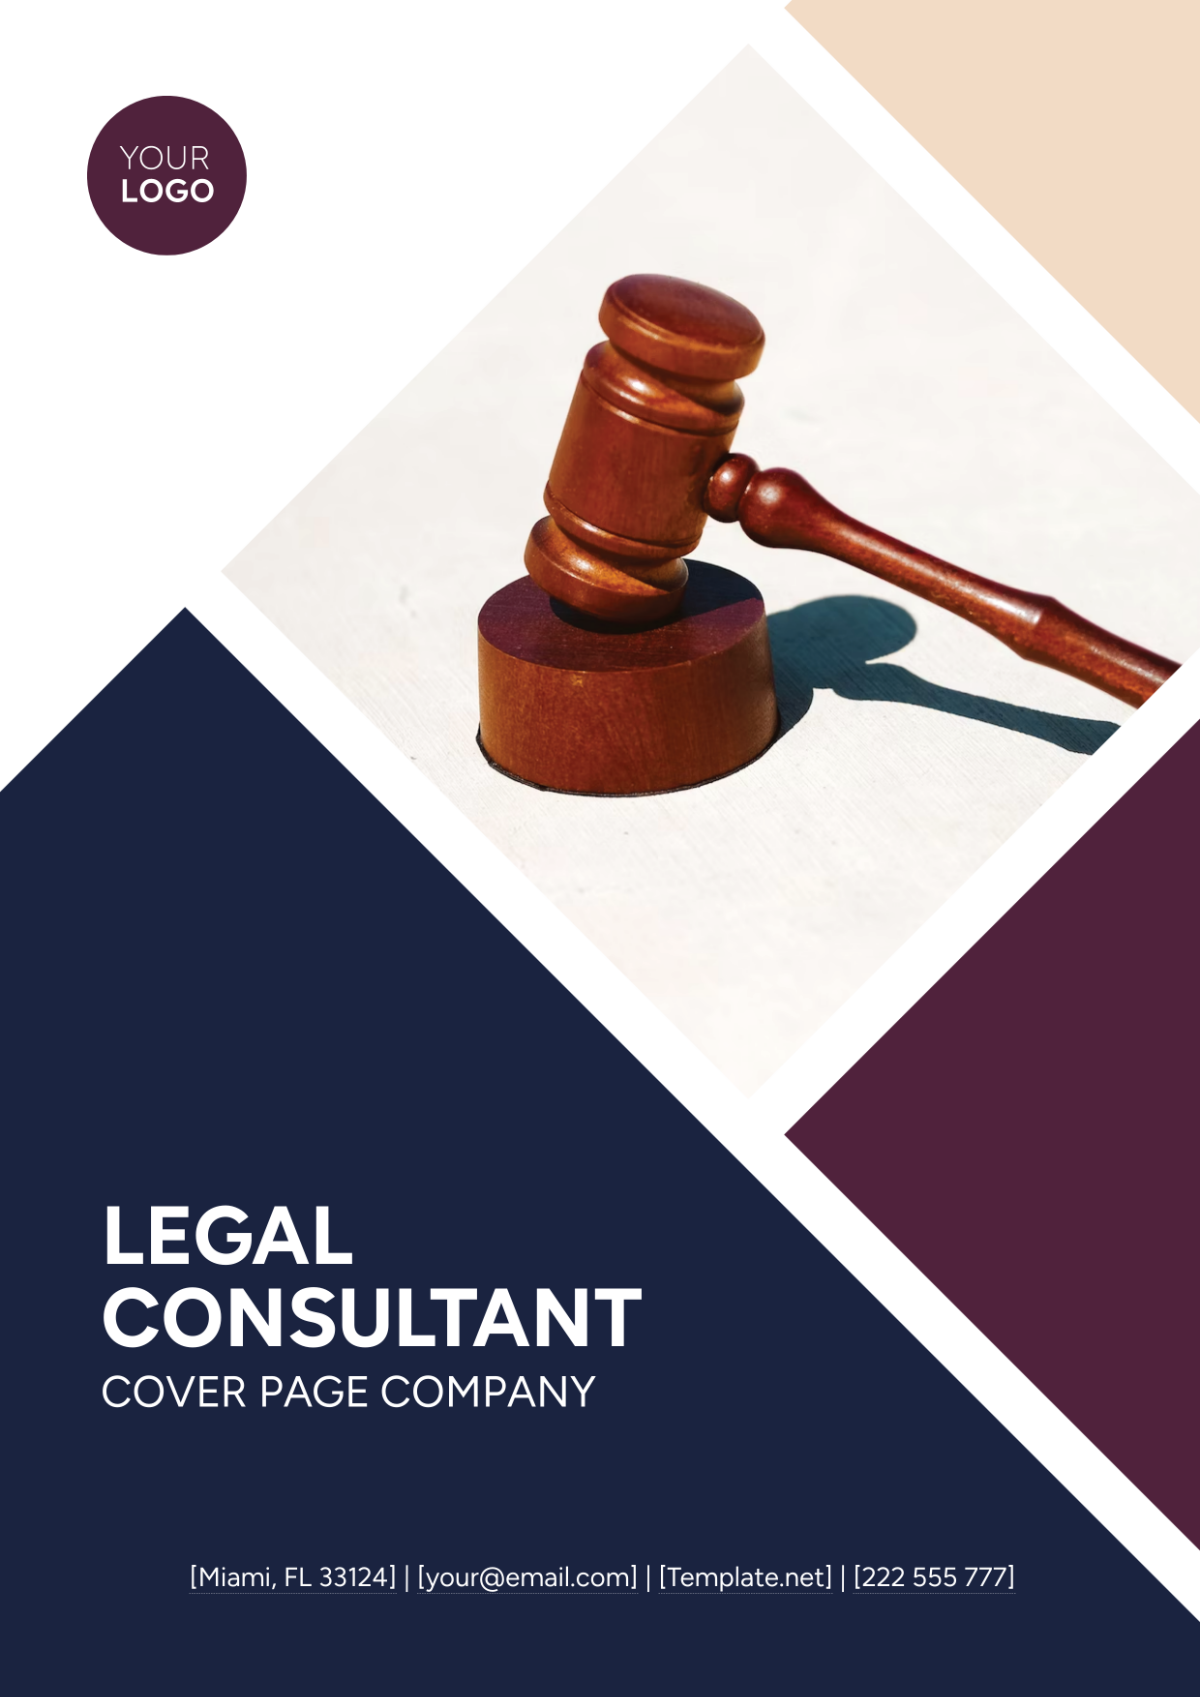 Legal Consultant Cover Page Company